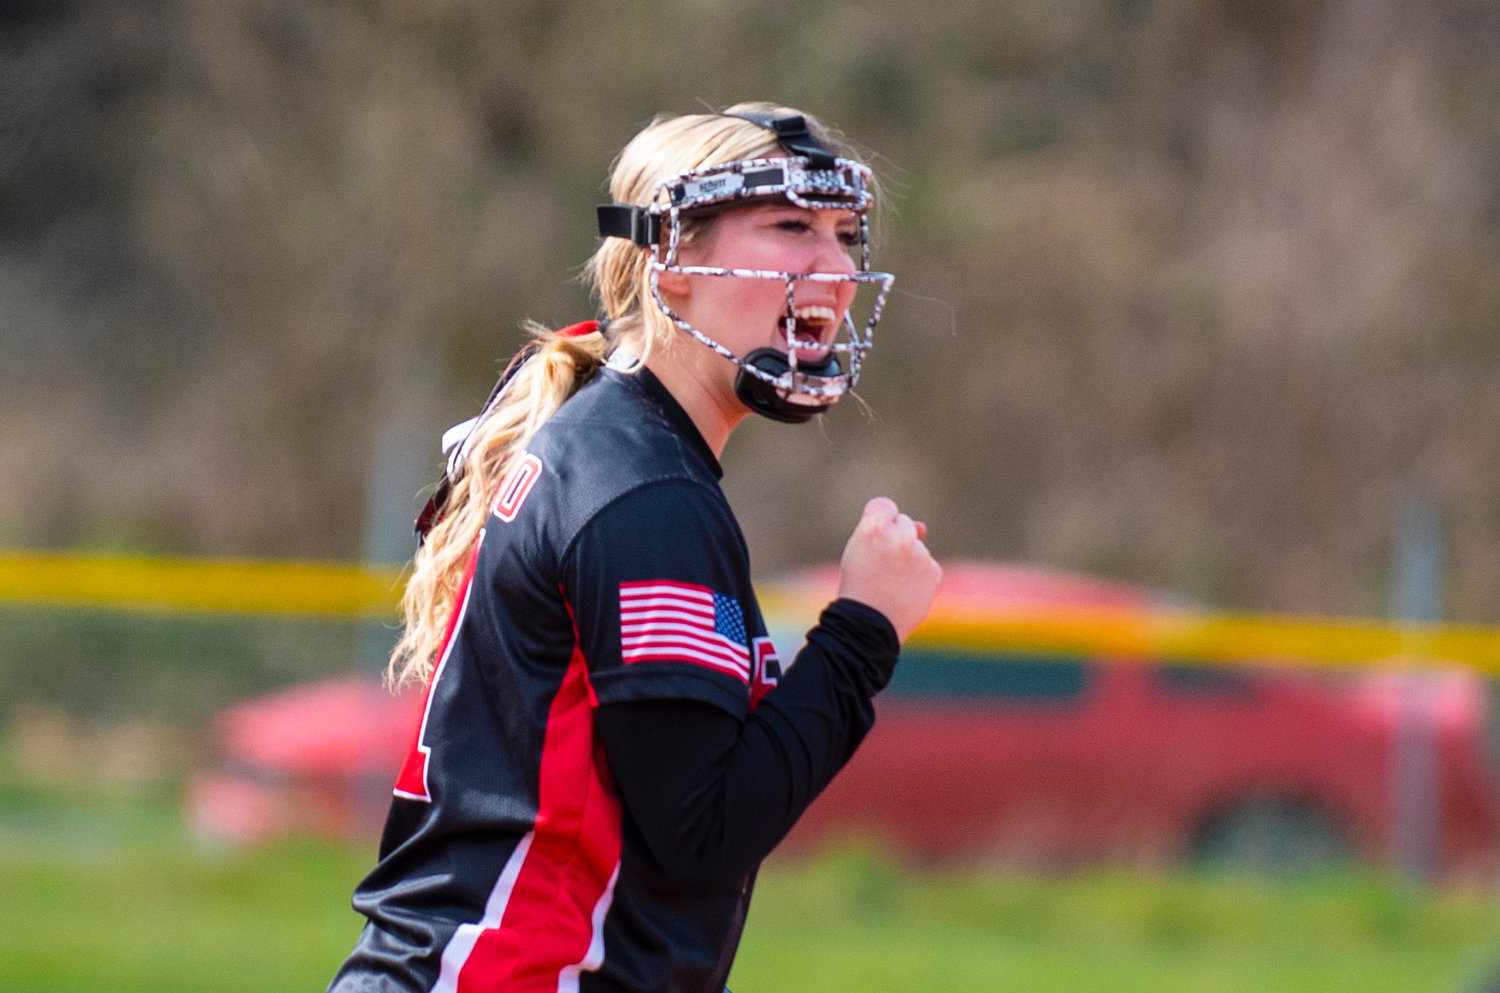 Tenino senior shortstop Cassie Cannon cheers after the Beavers get an out against Montesano on April 2, 2021.